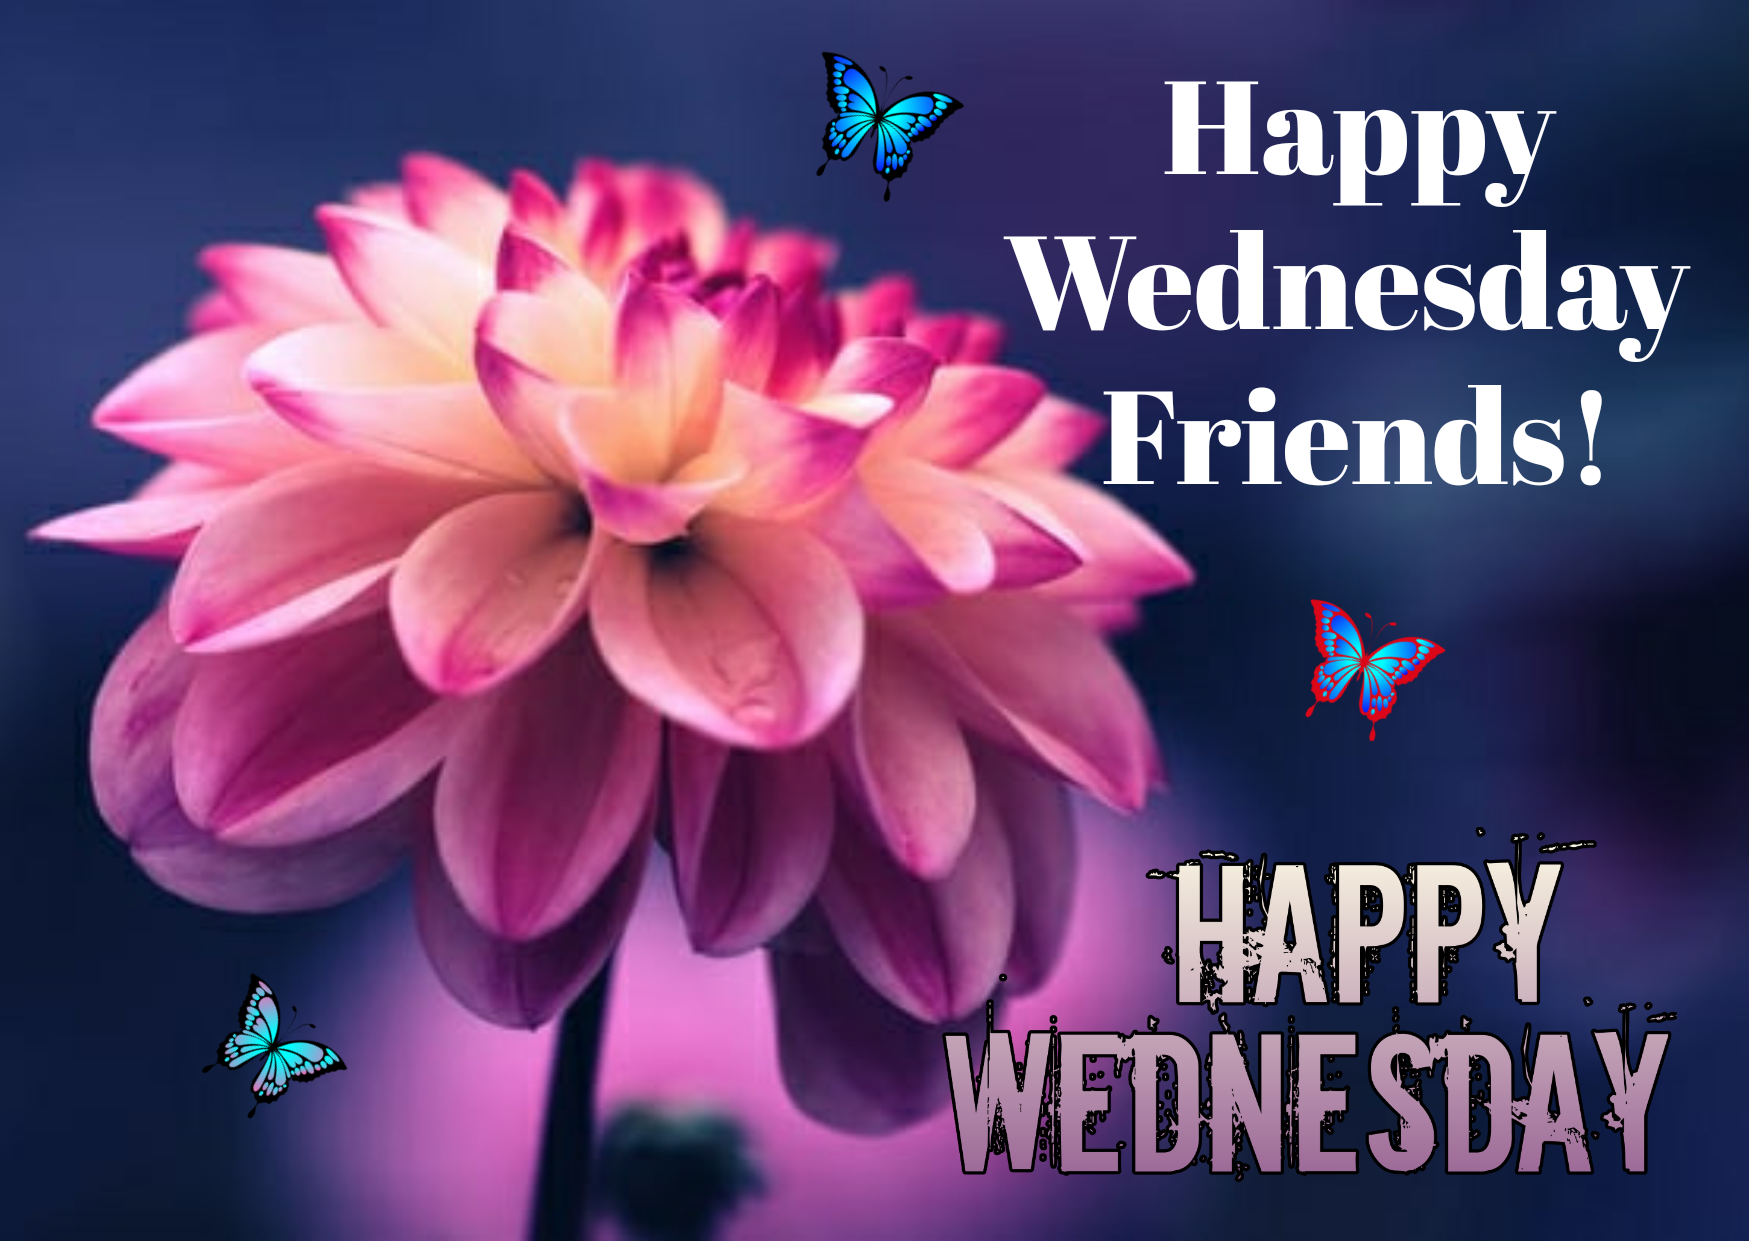 Happy Wednesday images, wishes, wallpaper, quotes, for whatsapp, Facebook,